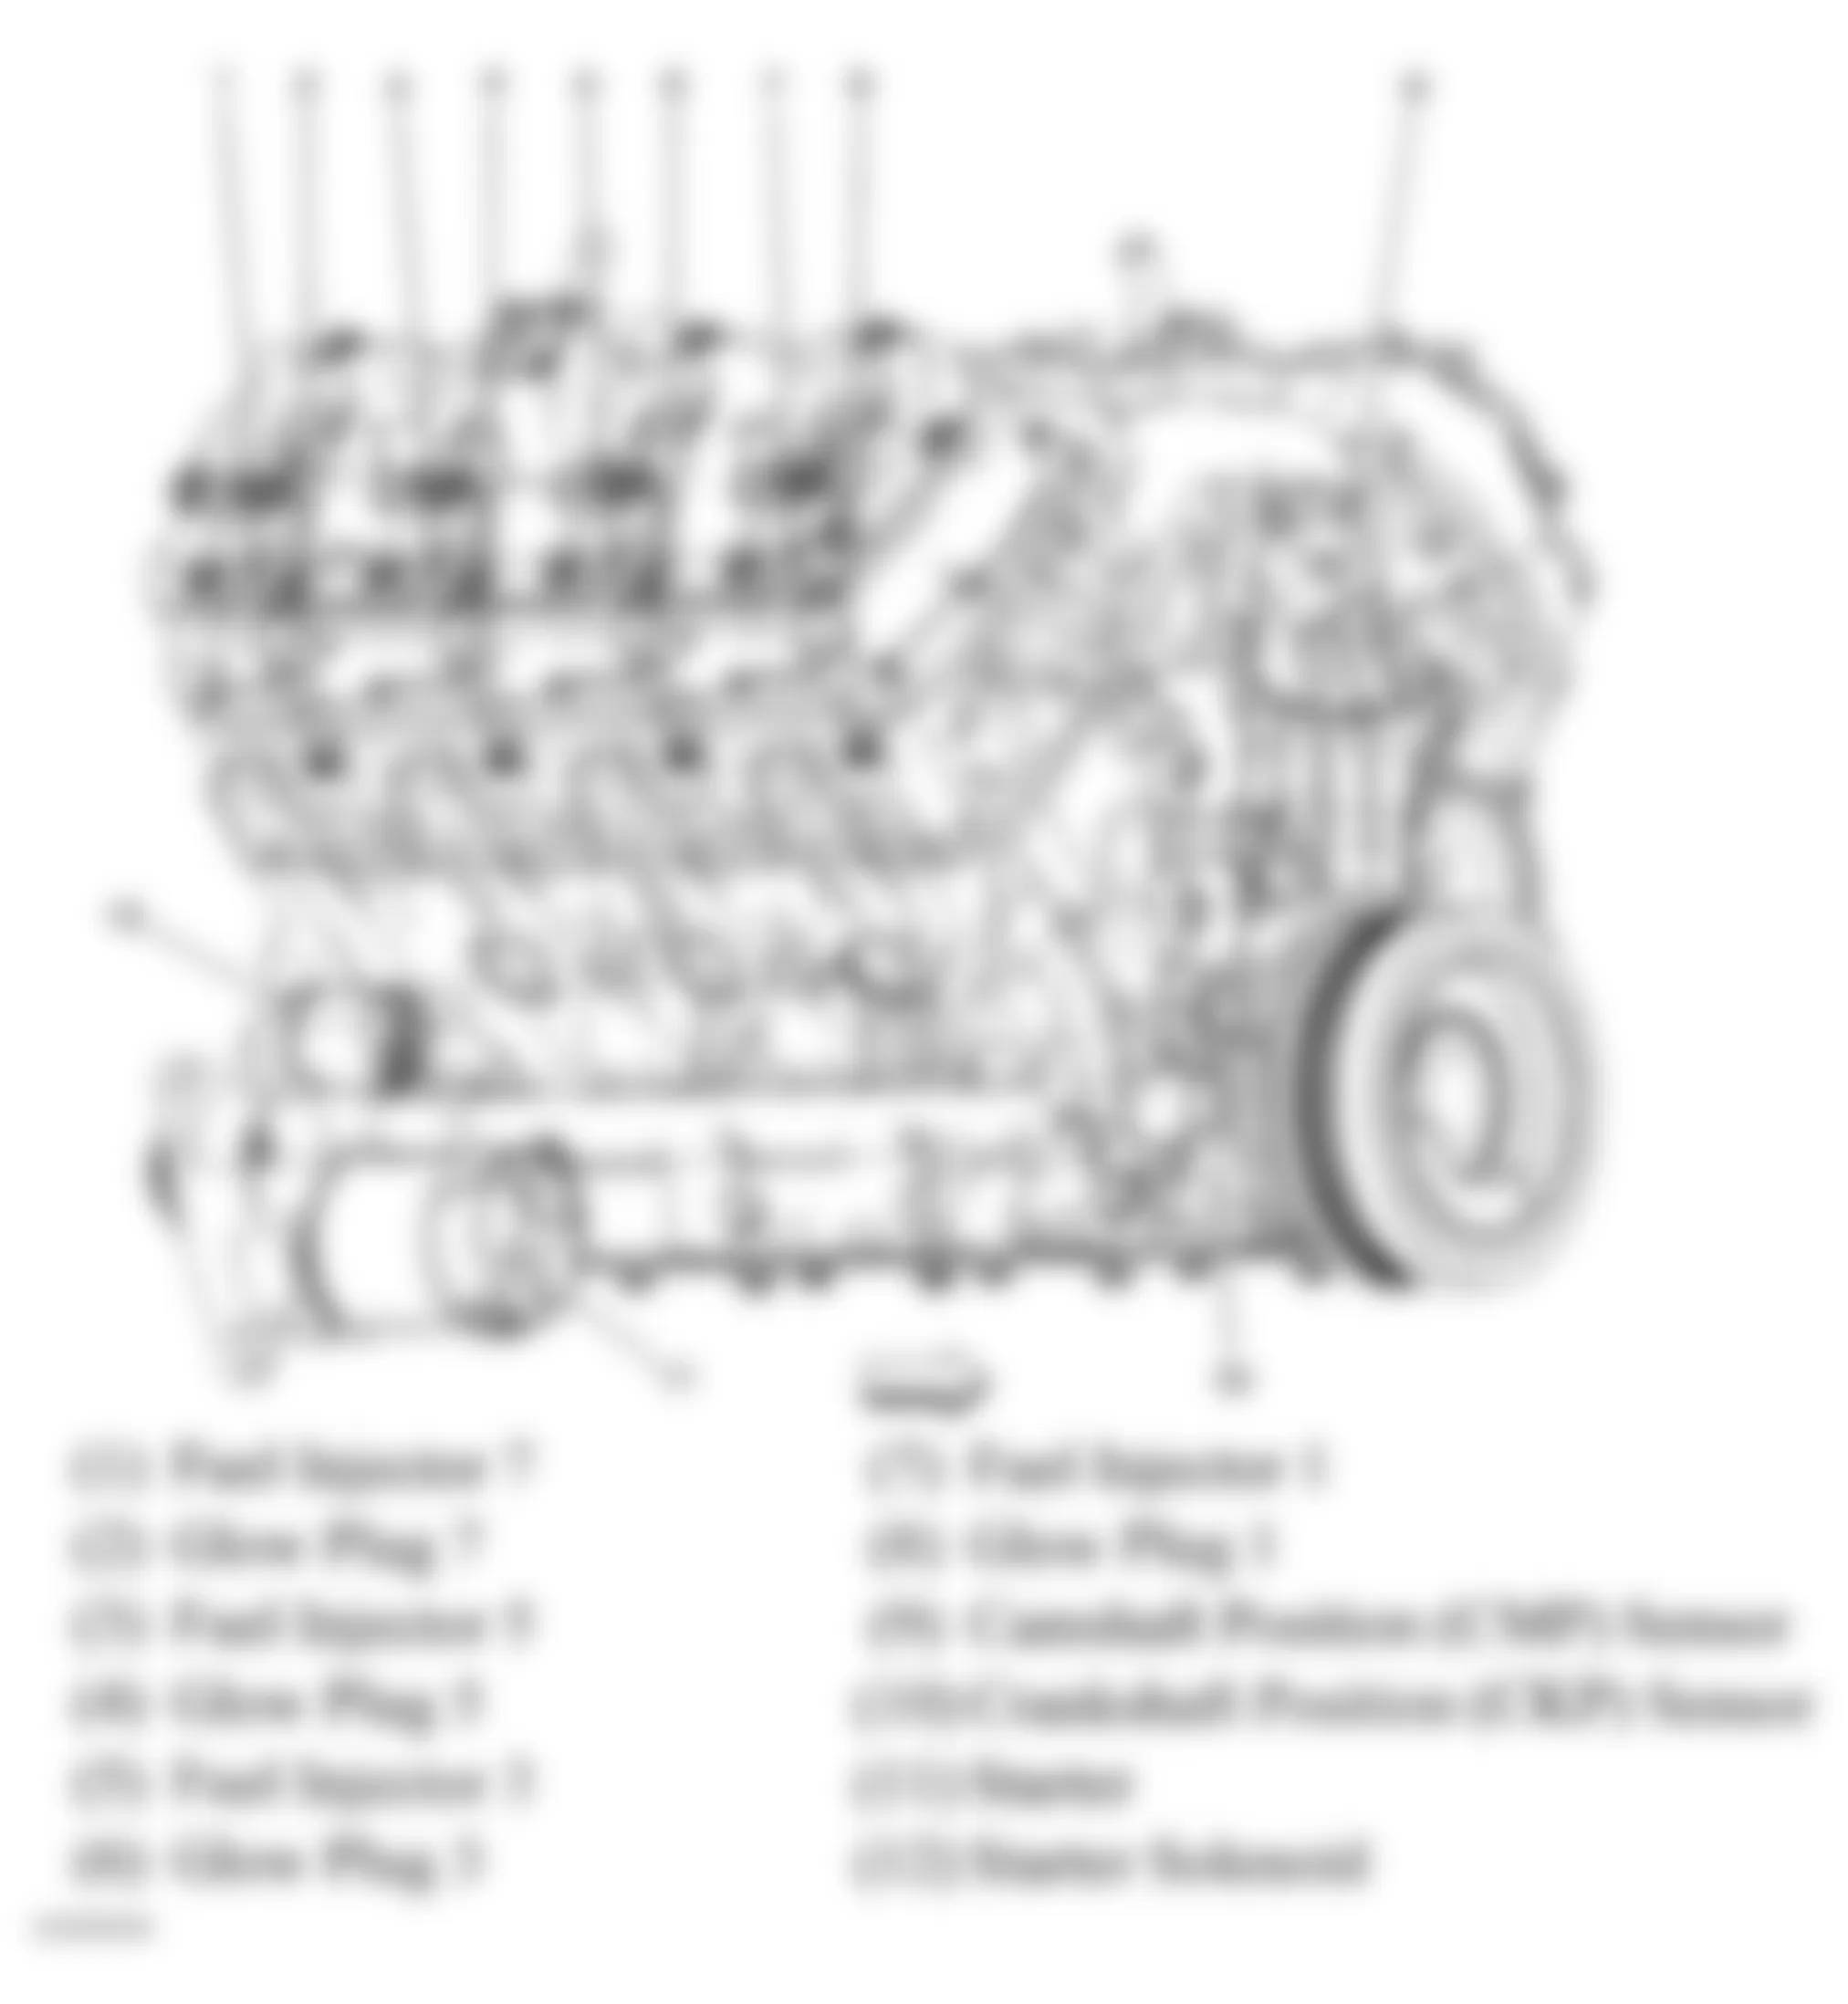 GMC Savana Special G3500 2009 - Component Locations -  Right Side Of Engine (6.6L)